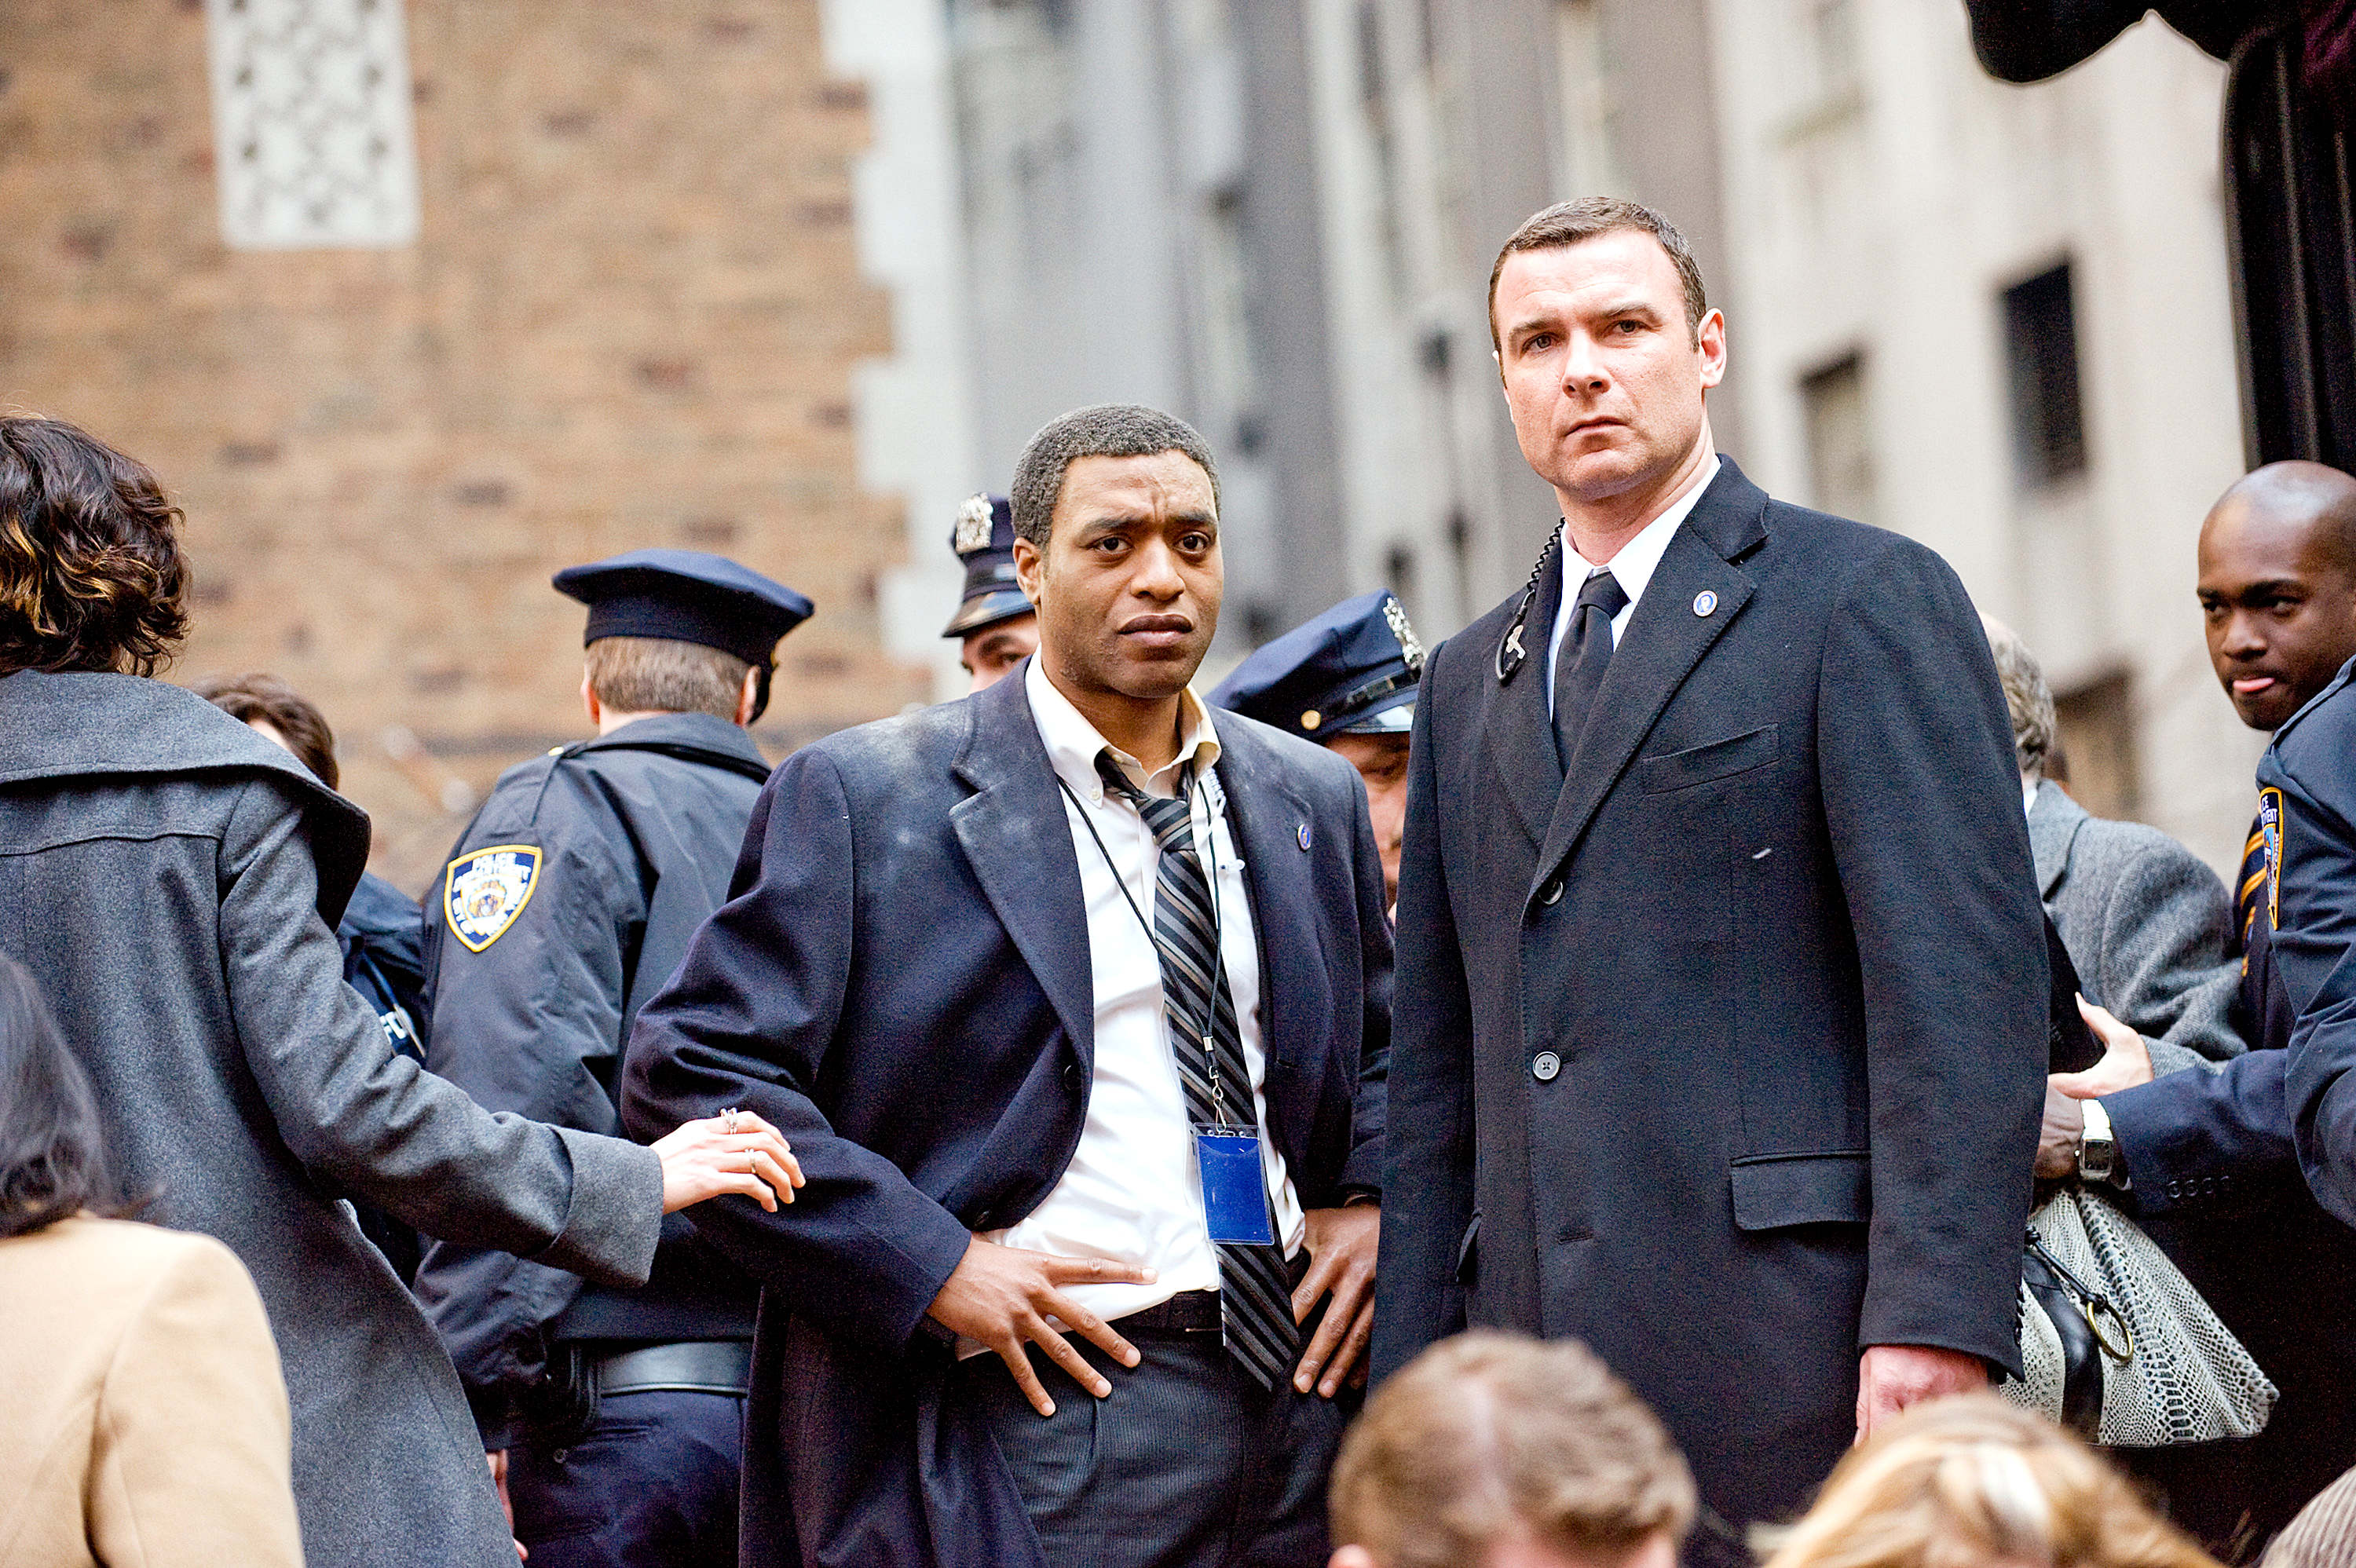 Chiwetel Ejiofor stars as Peabody and Liev Schreiber stars as Winter in Columbia Pictures' Salt (2010)